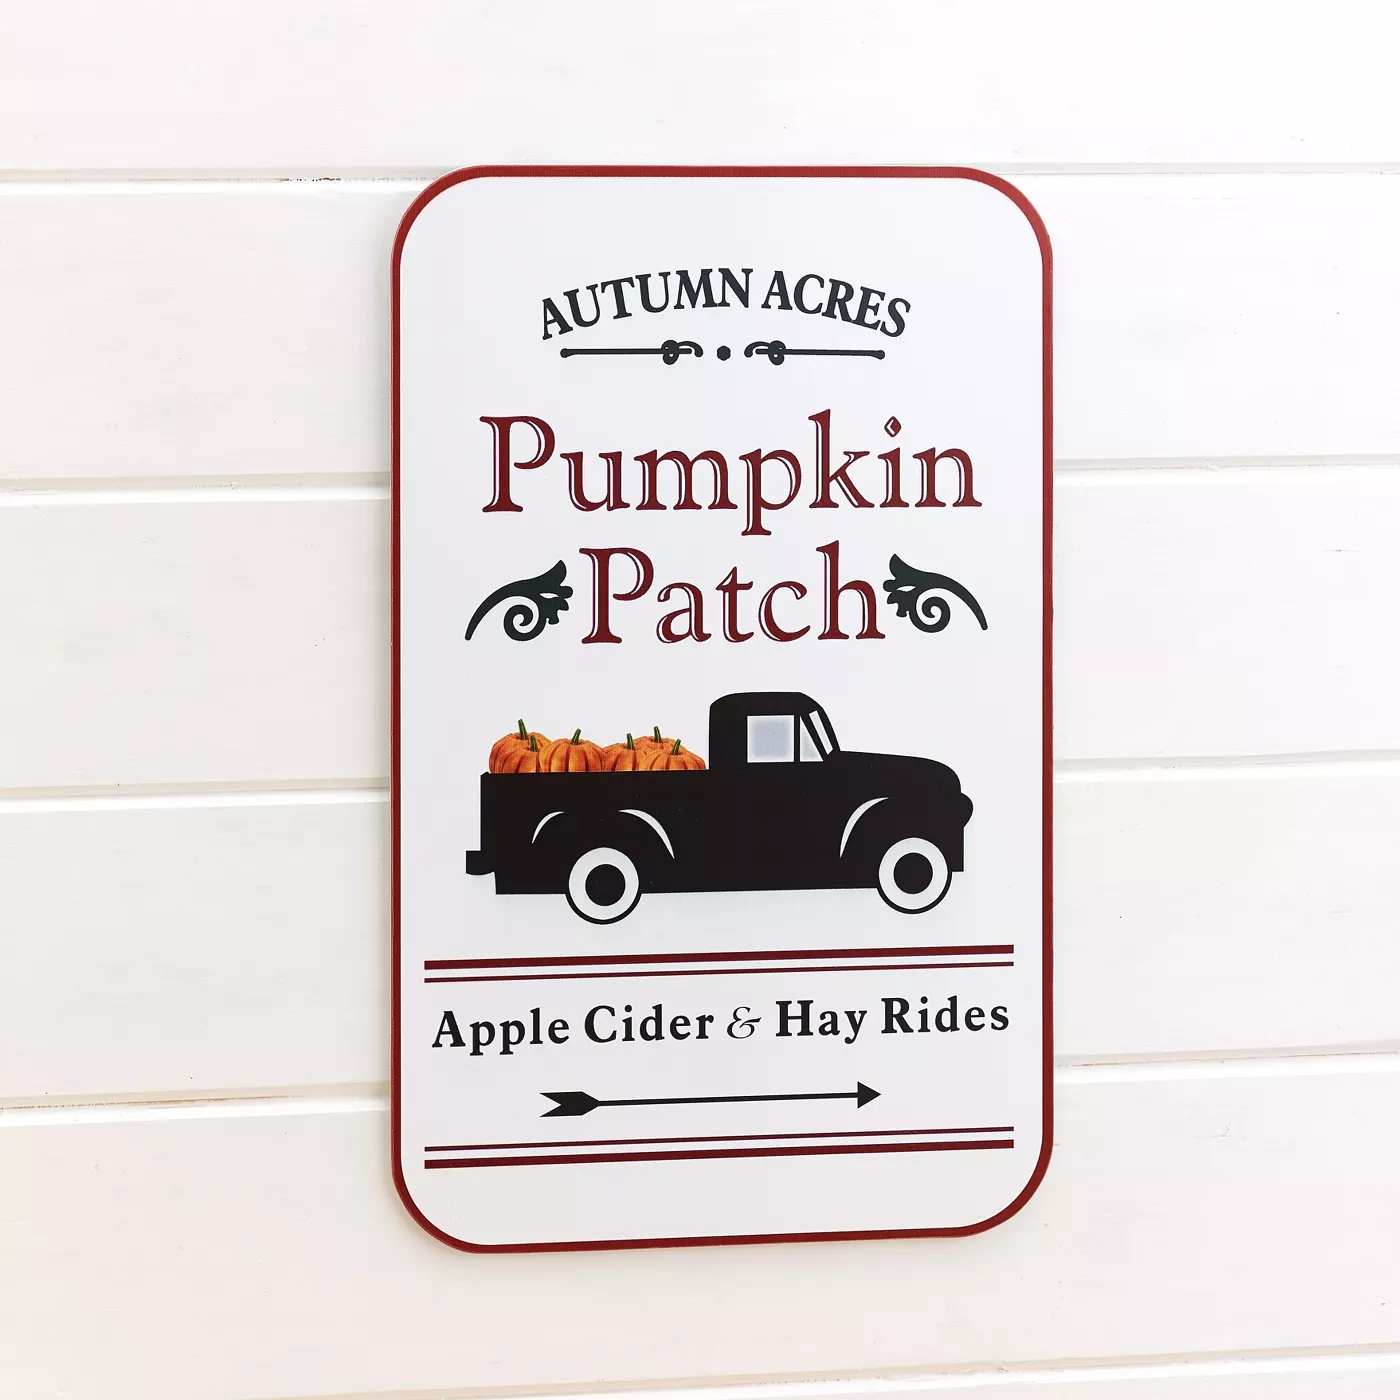 Lakeside Autumn Acres Metal Wall Hanging Harvest Pumpkin Patch Sign with Hay Ride Truck - image 1 of 3